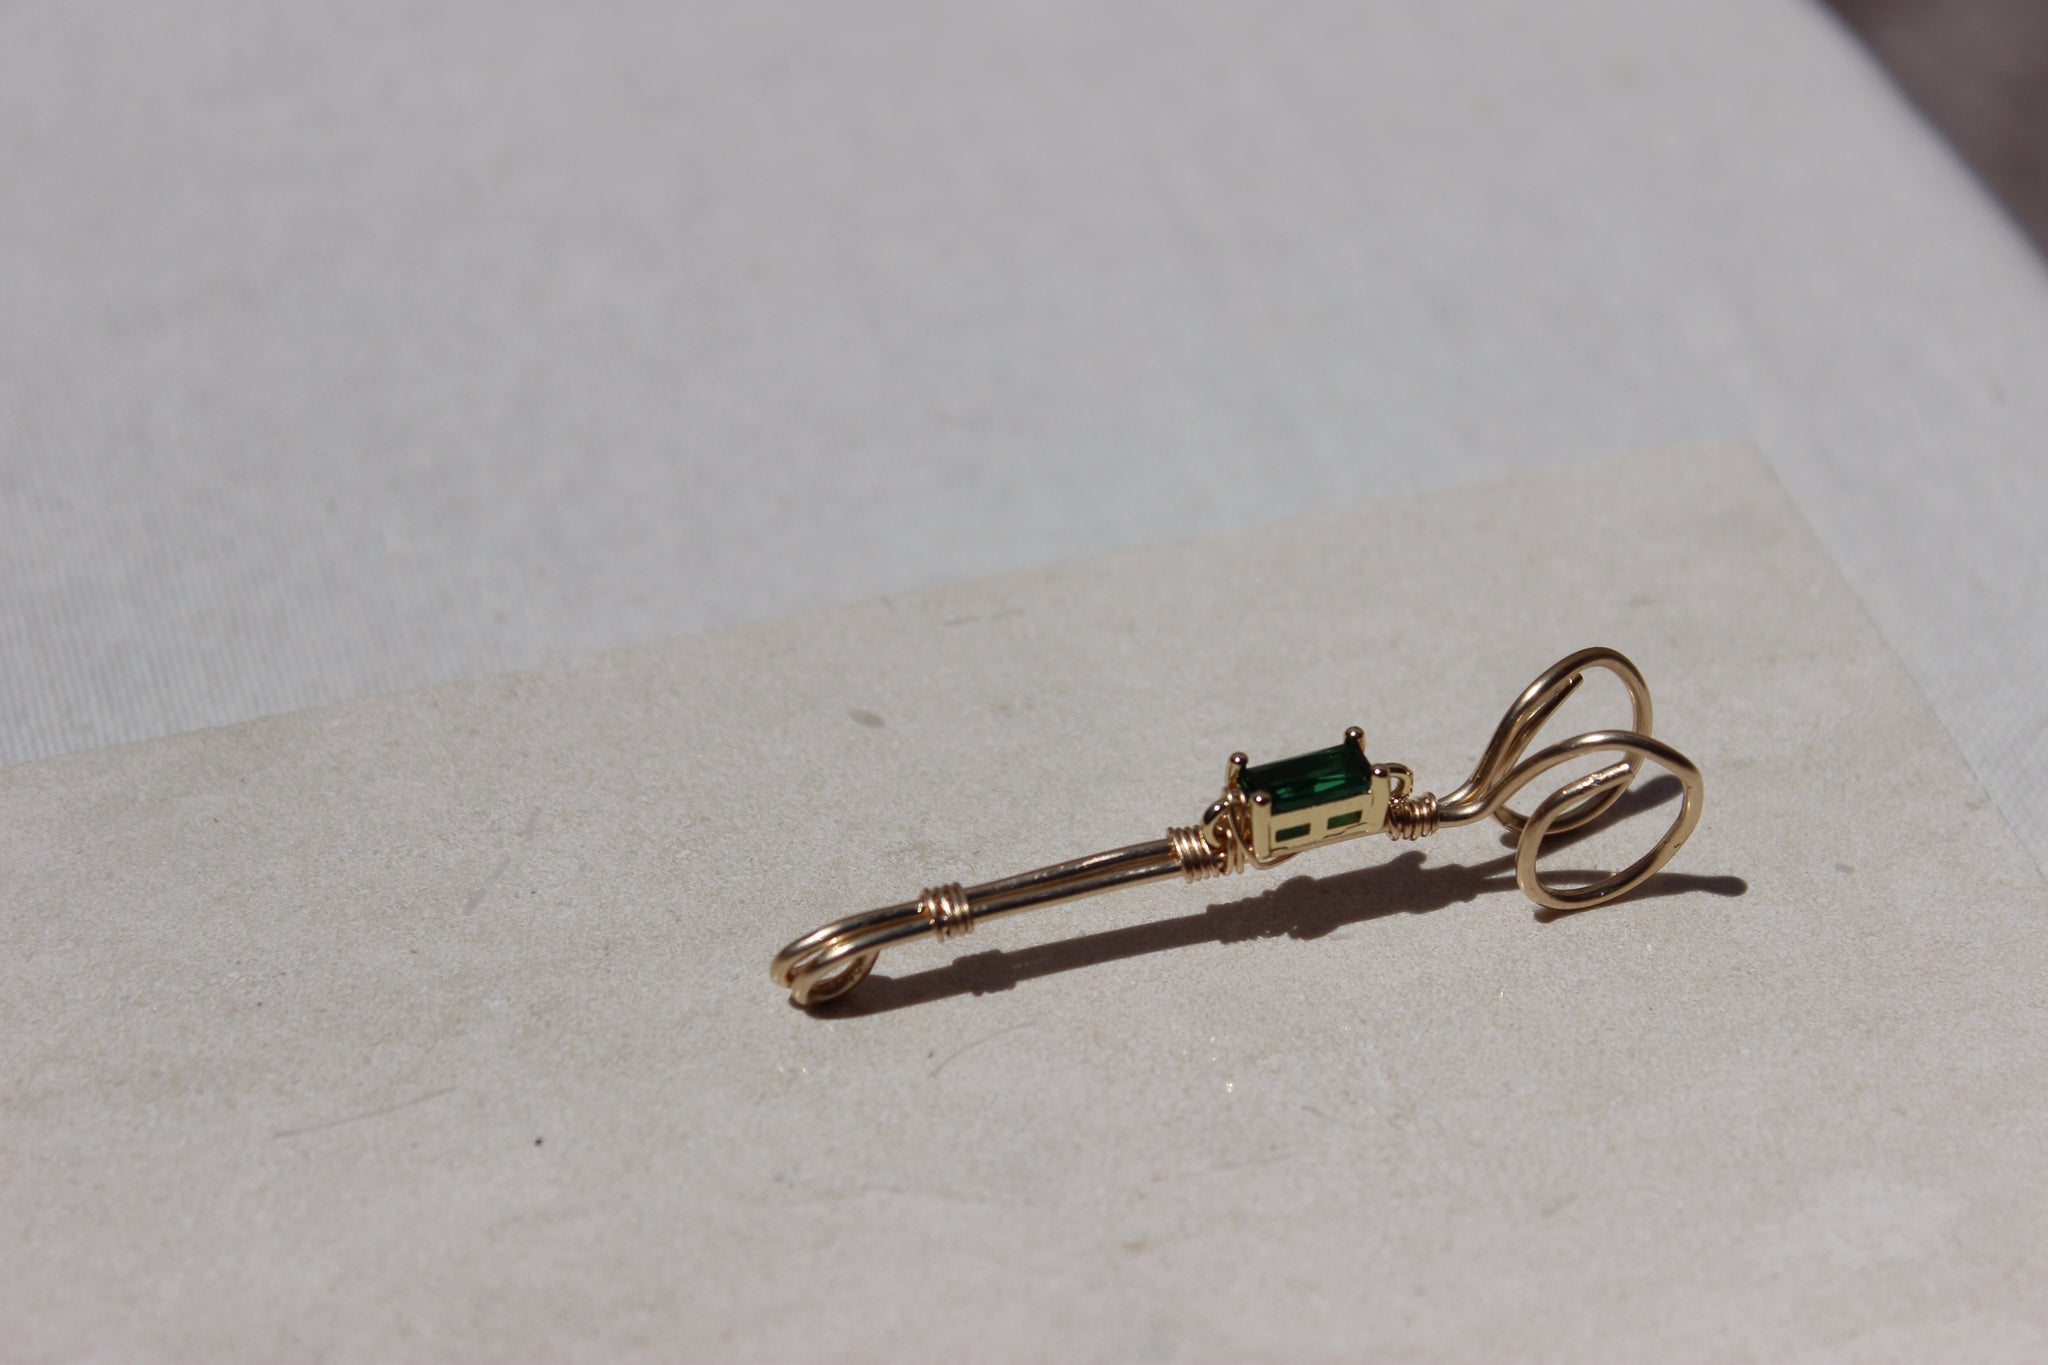 The Emerald Joint Holder – Toasted Jewelry